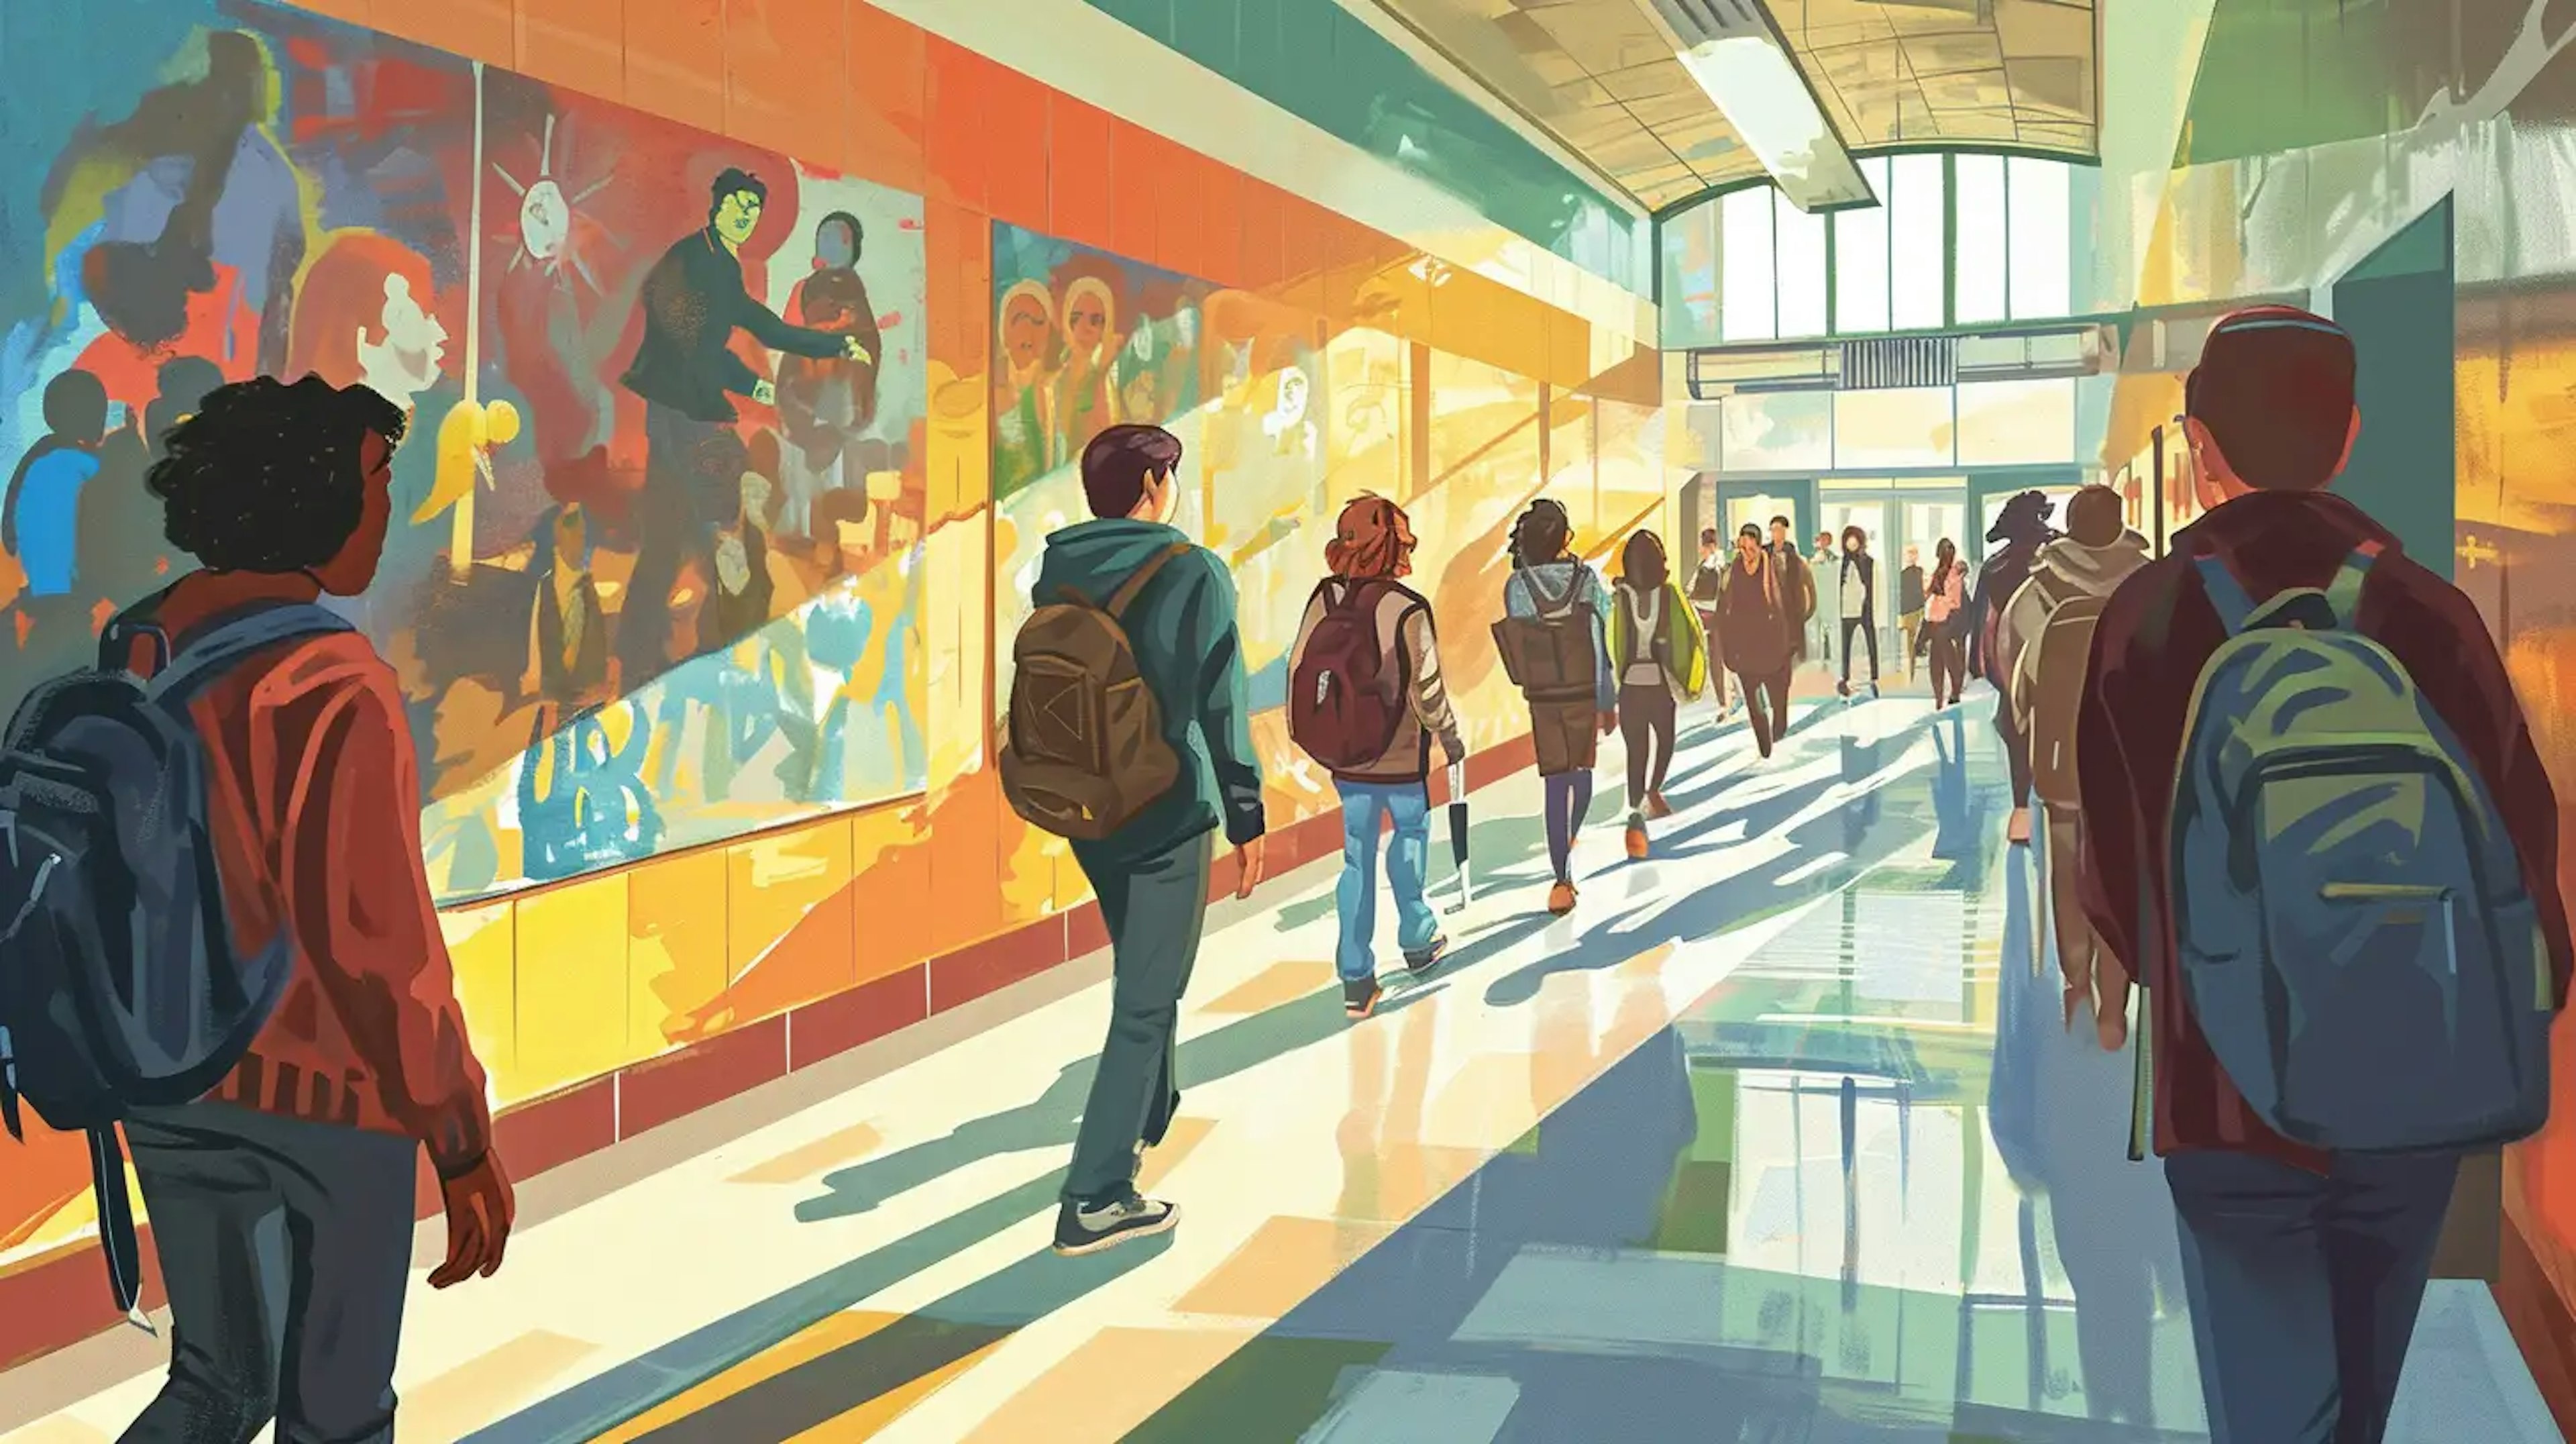 An Illustration of a busy school hallway lined with artful murals and filled with students.